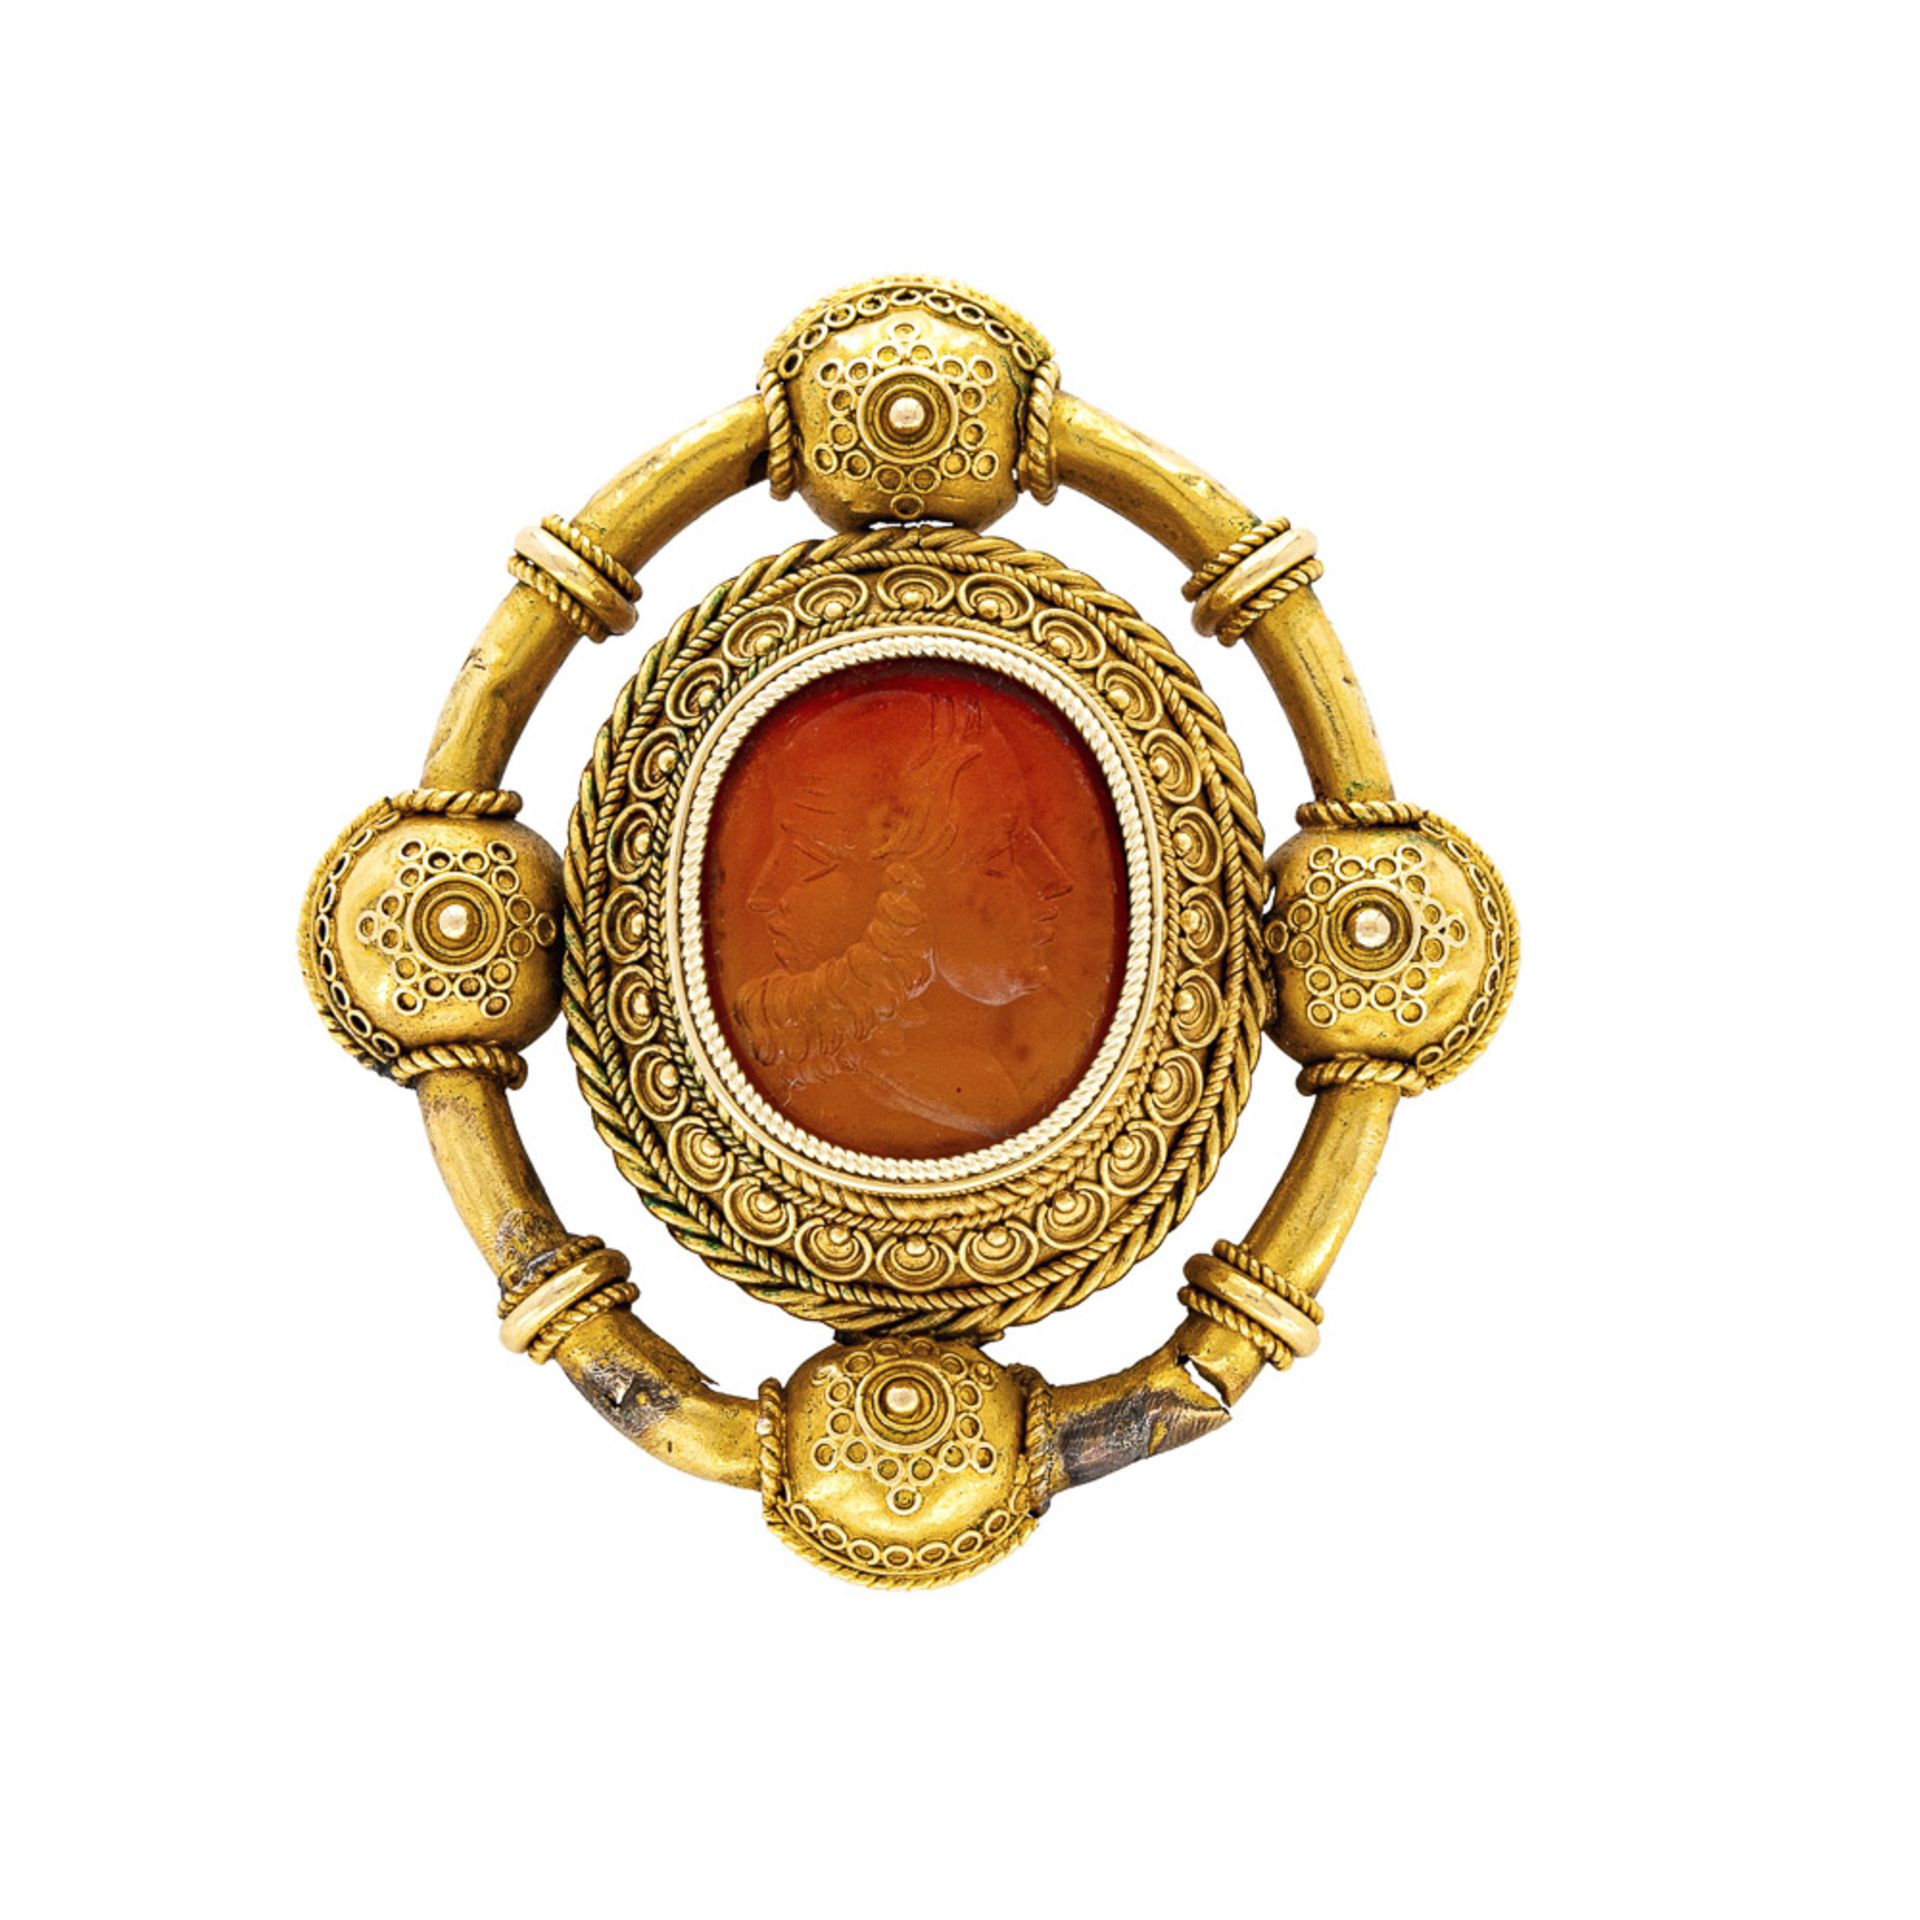 Antique 12 kt yellow gold brooch with engraved carnelian